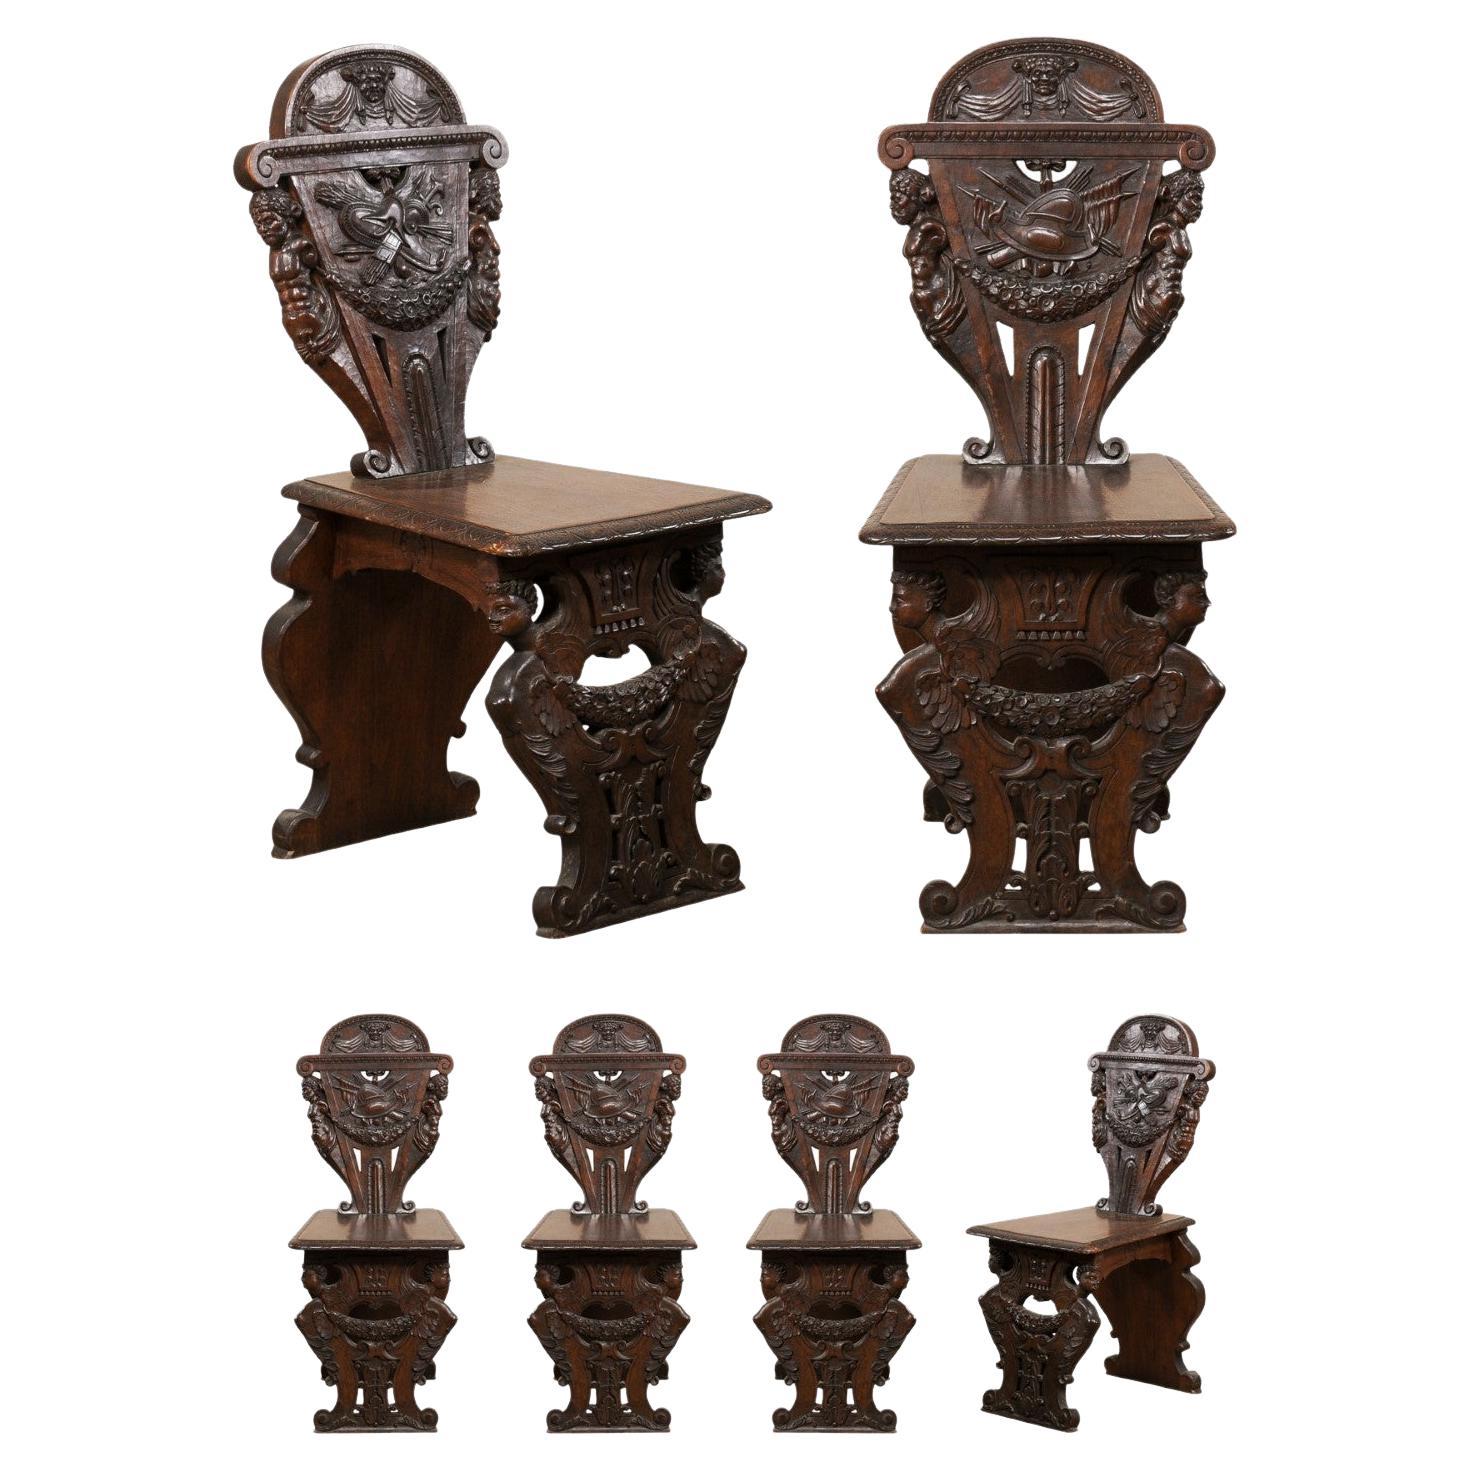 Set of 6 English Renaissance Ornately-Carved Hall Chairs, Turn of 19th & 20th C